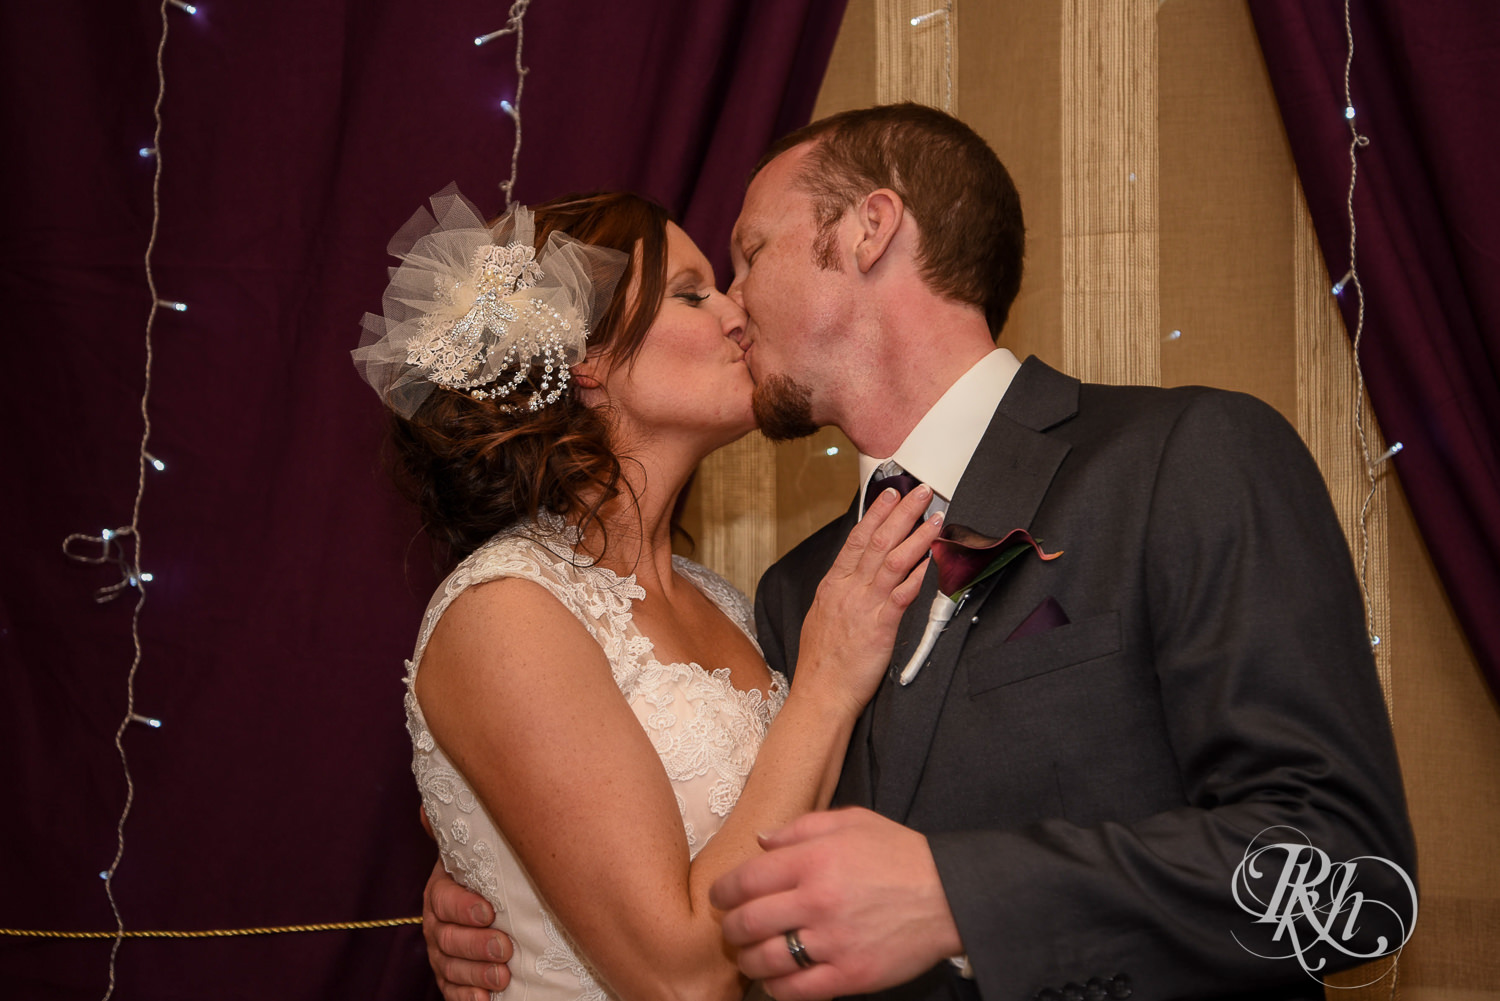 Bride and groom kiss during wedding reception at White Bear Country Inn in White Bear Lake, Minnesota.